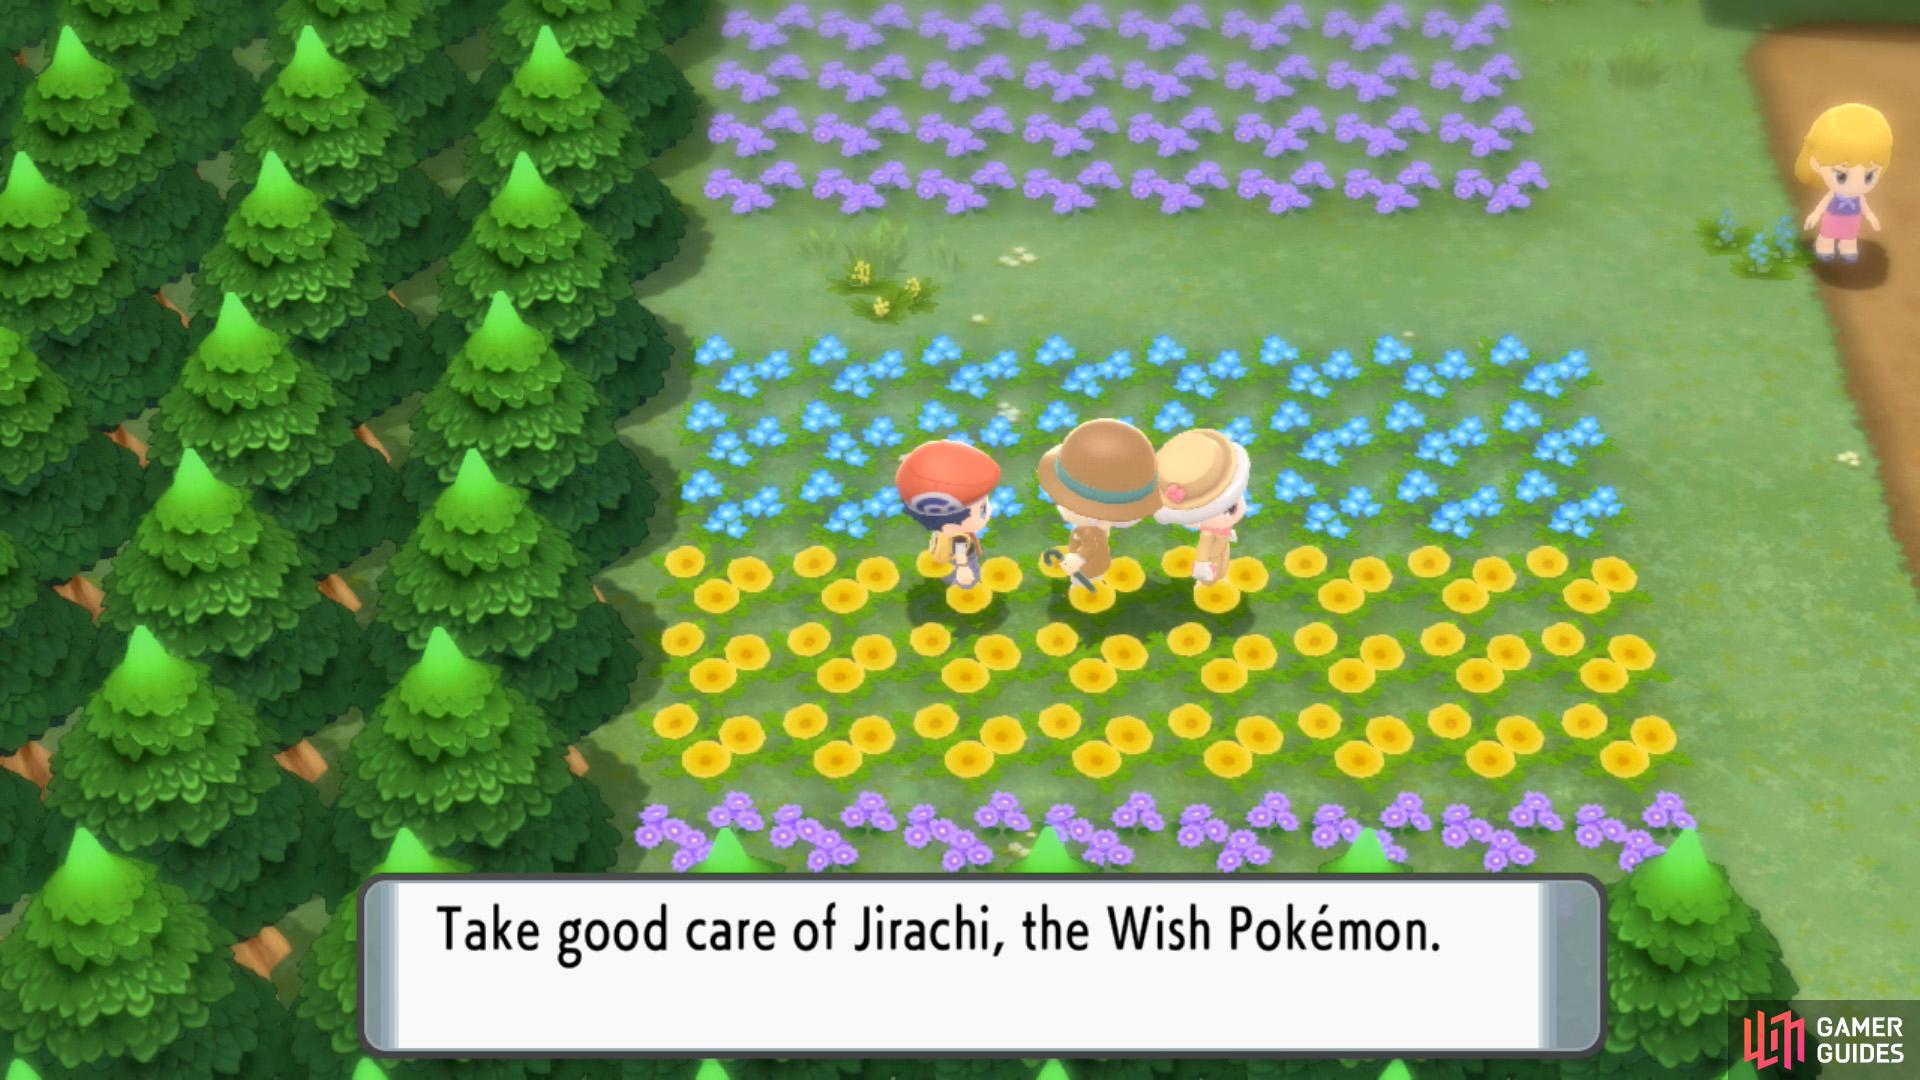 The man will give you Jirachi